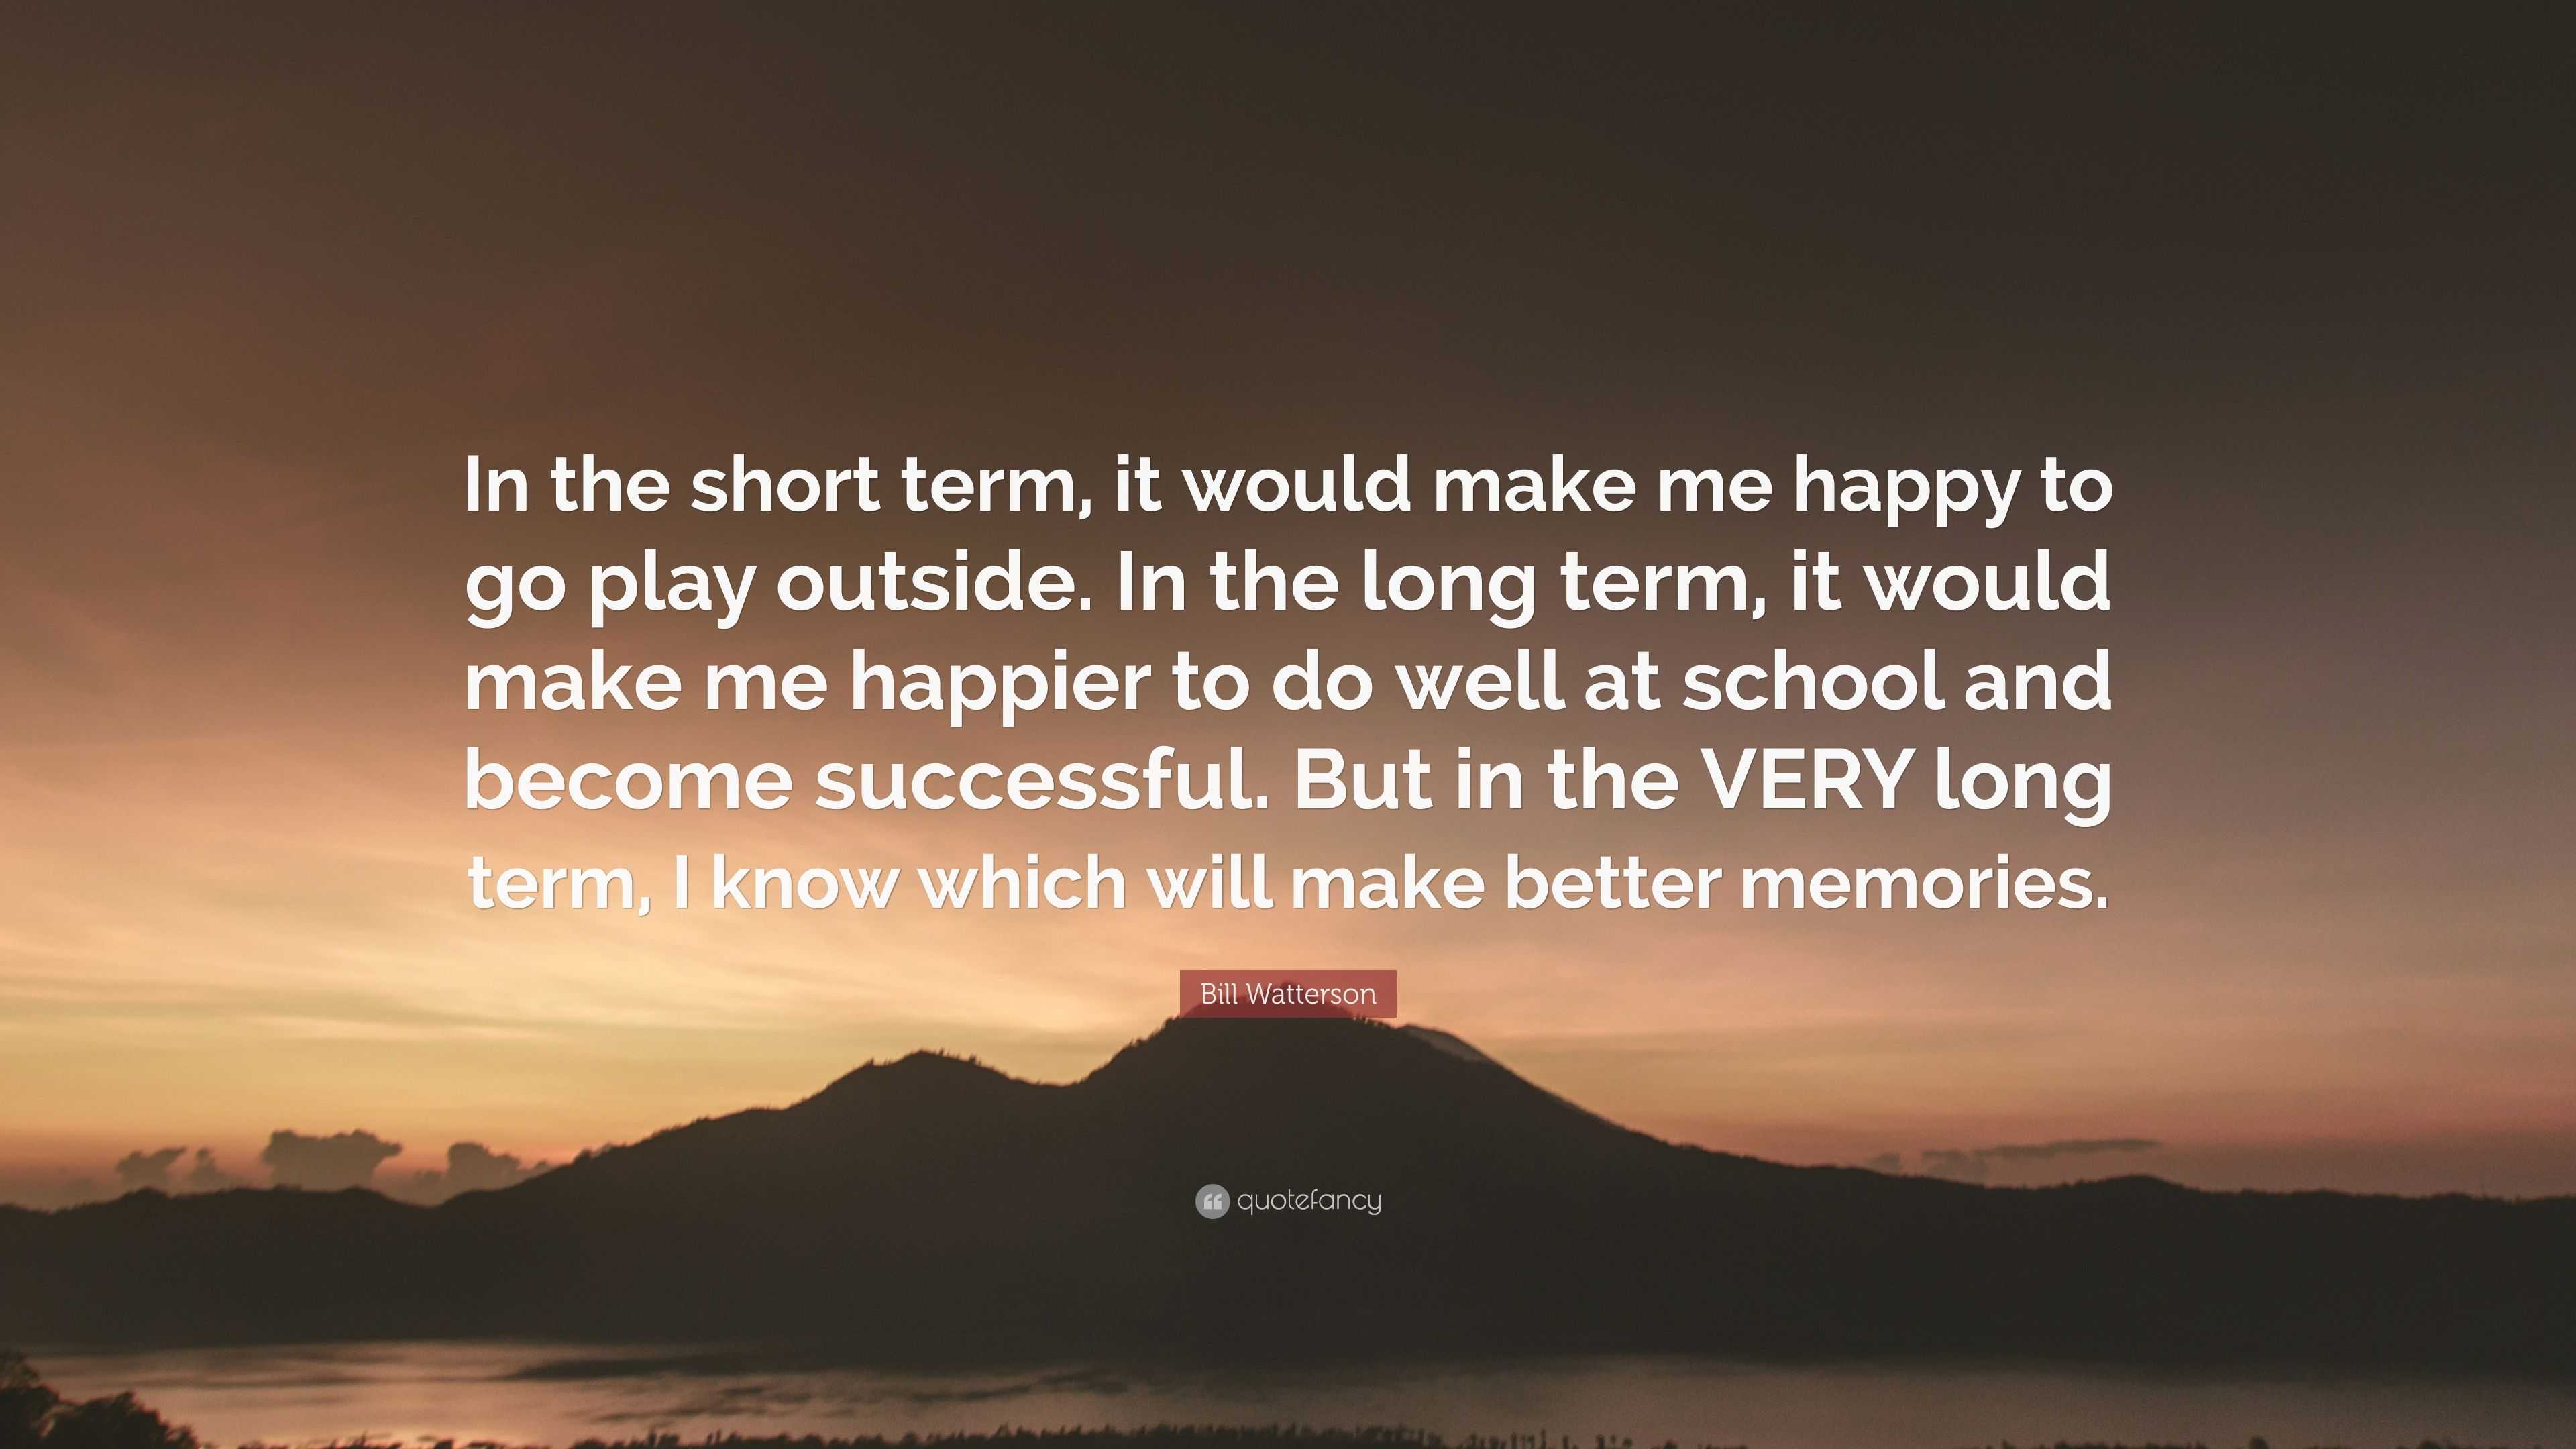 Bill Watterson Quote In The Short Term It Would Make Me Happy To Go Play Outside In The Long Term It Would Make Me Happier To Do Well At S